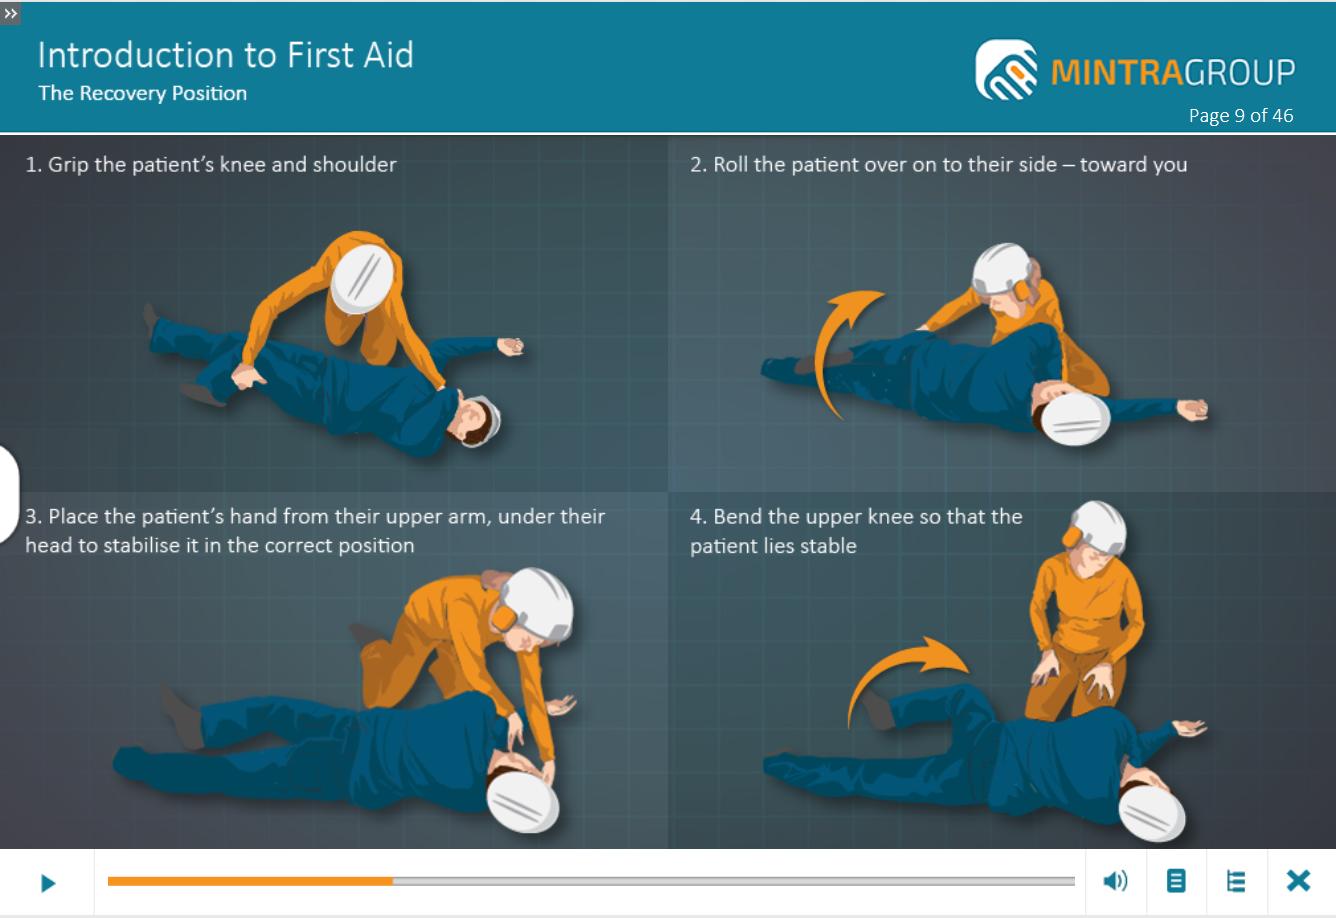 Introduction to First Aid Training